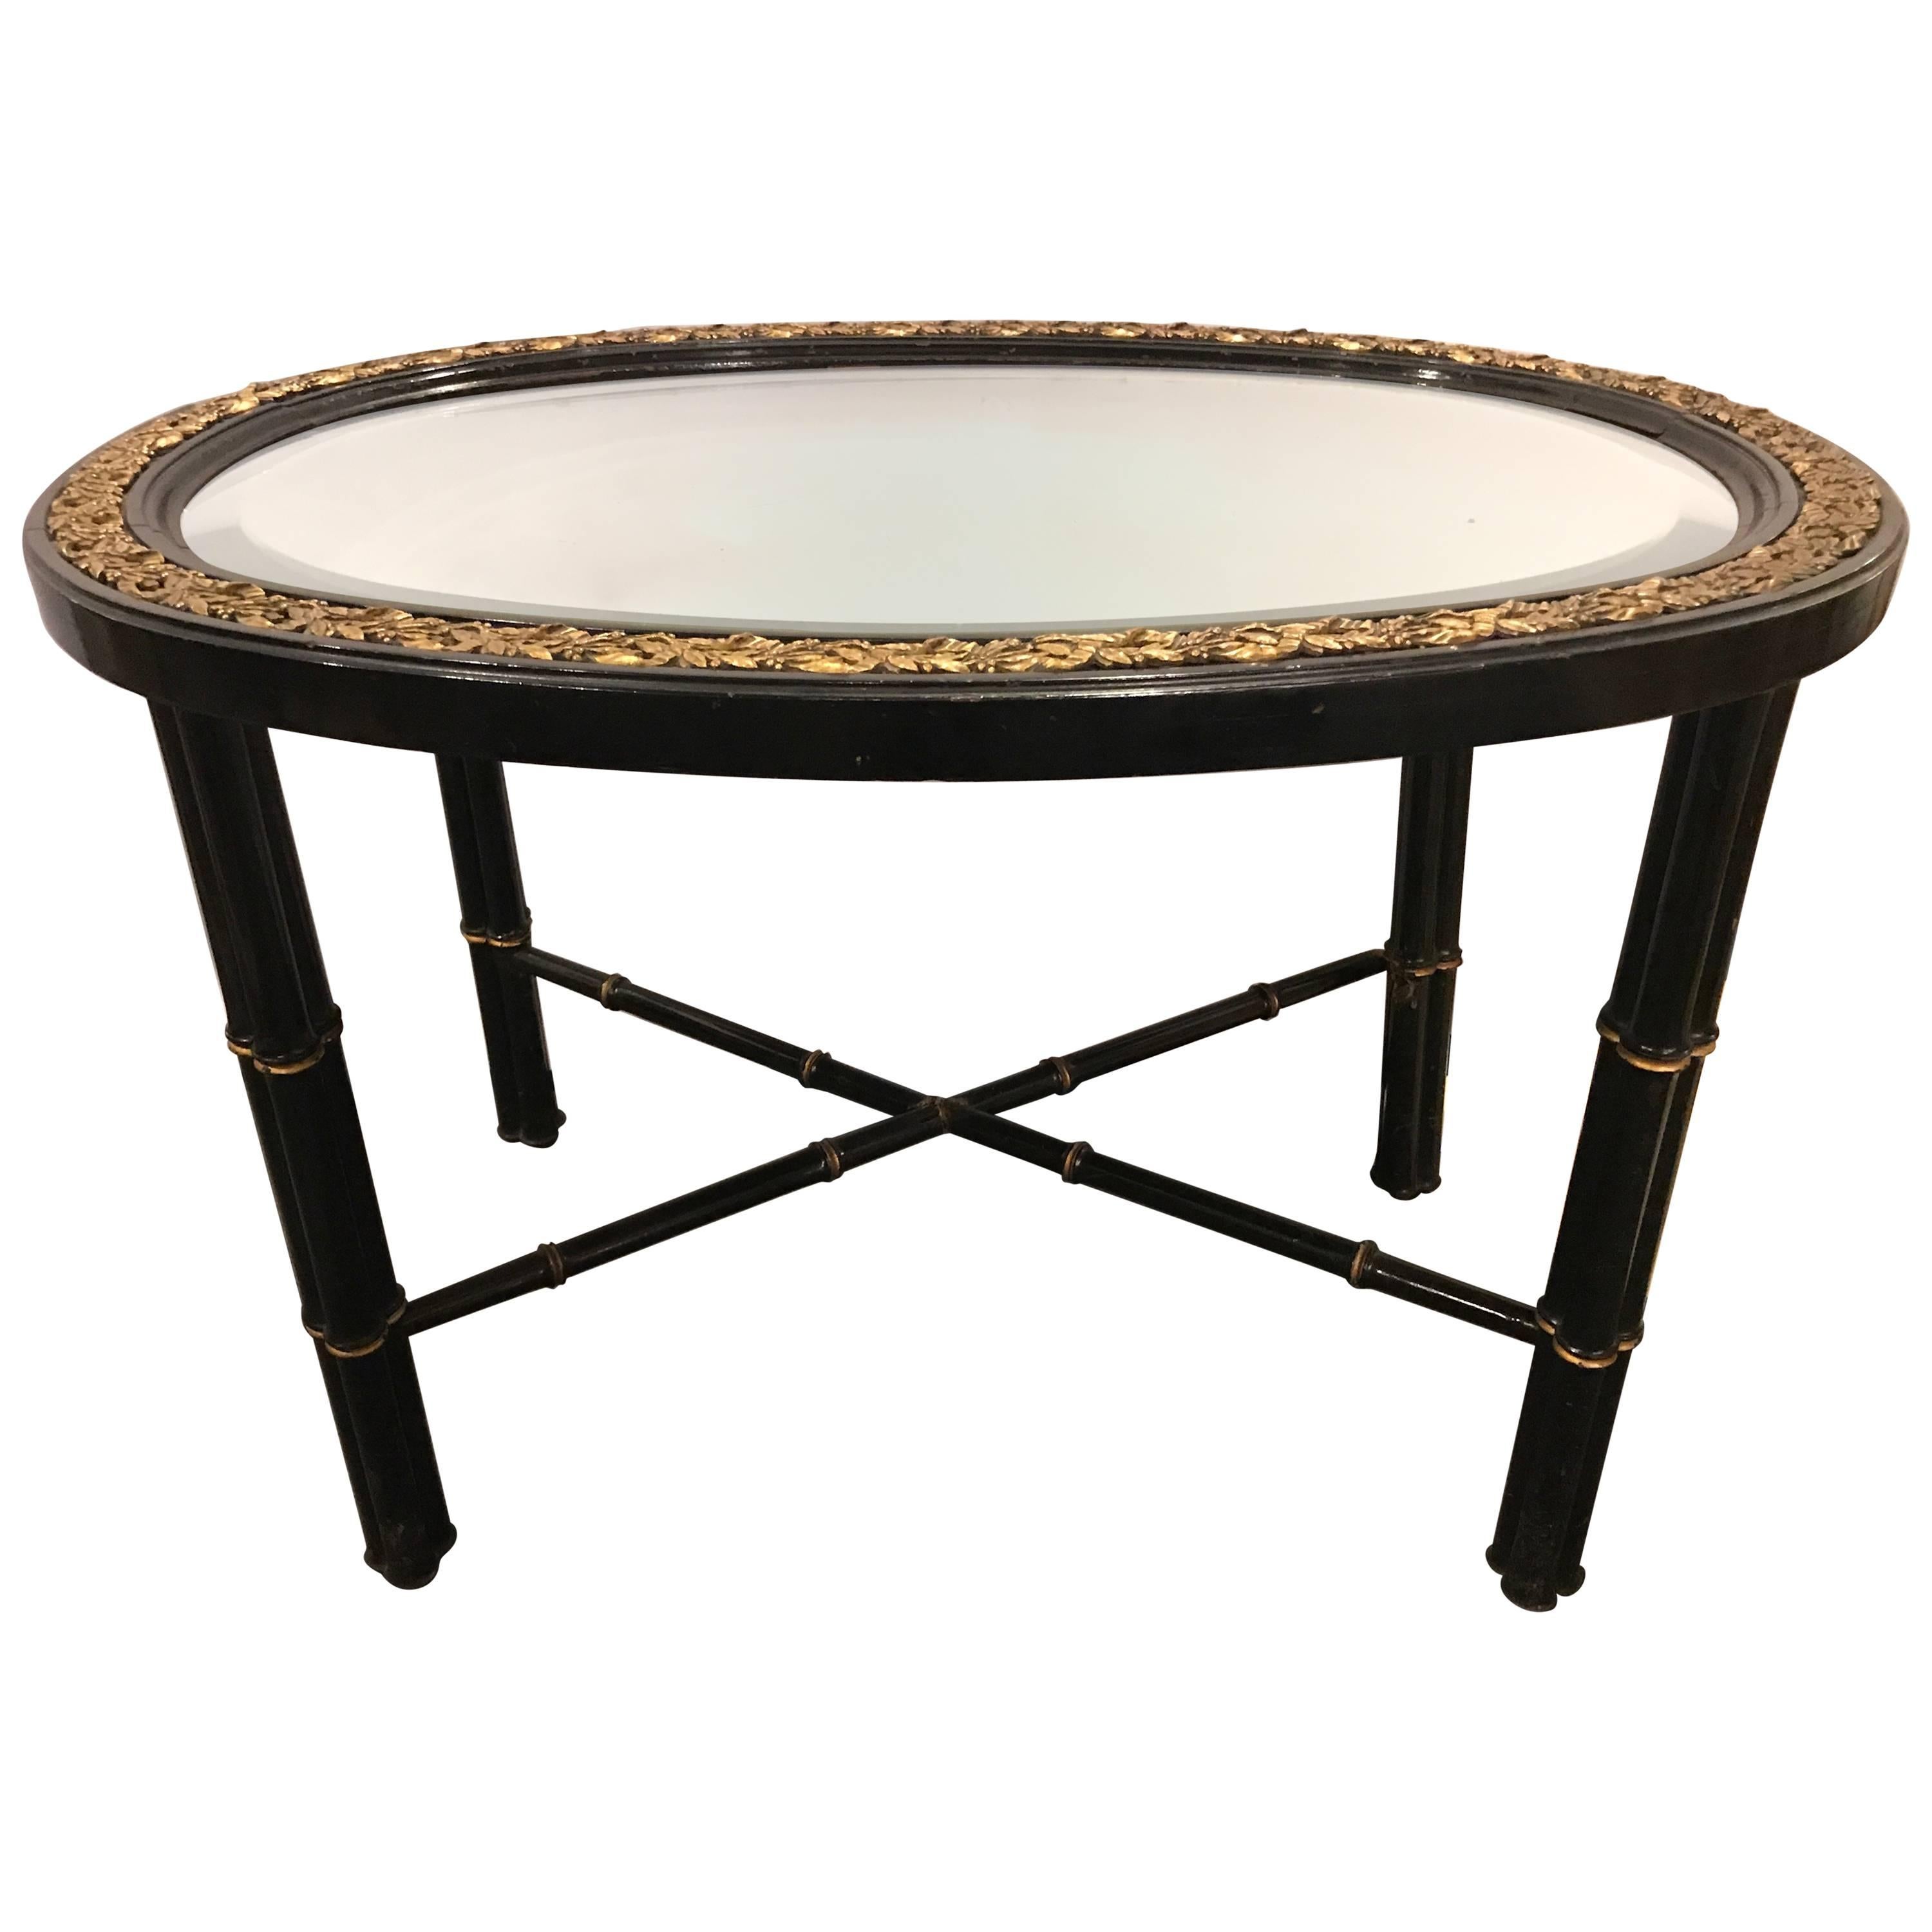 Hollywood Regency Beveled Mirror Top Black Oval Coffee Table with Bronze Mounts For Sale